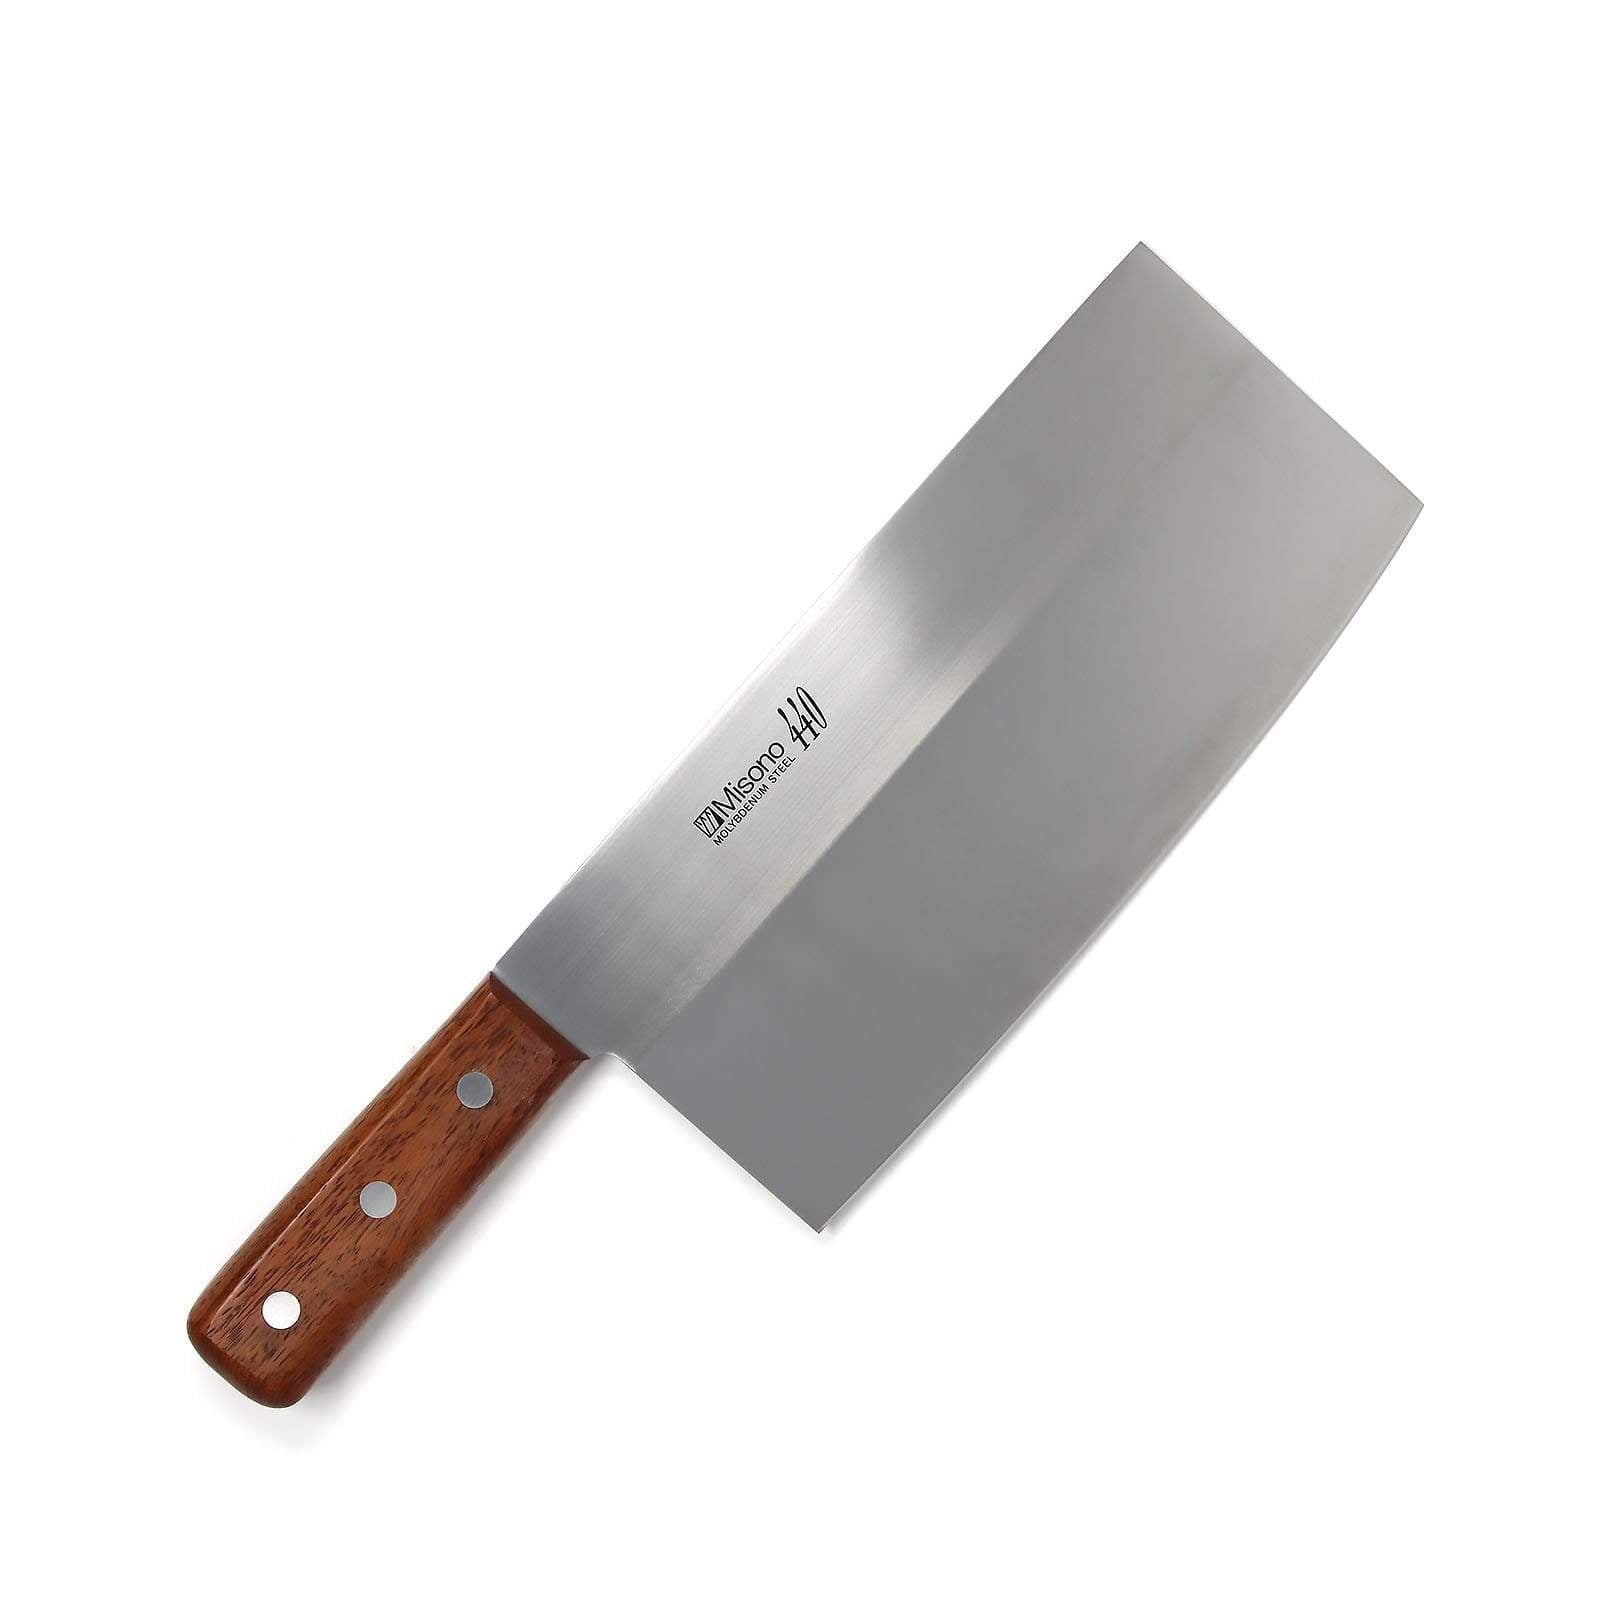 https://cdn.shopify.com/s/files/1/1610/3863/products/misono-440-series-chinese-cleaver-220mm-chinese-cleavers-7703959535699_1600x.jpg?v=1564045918